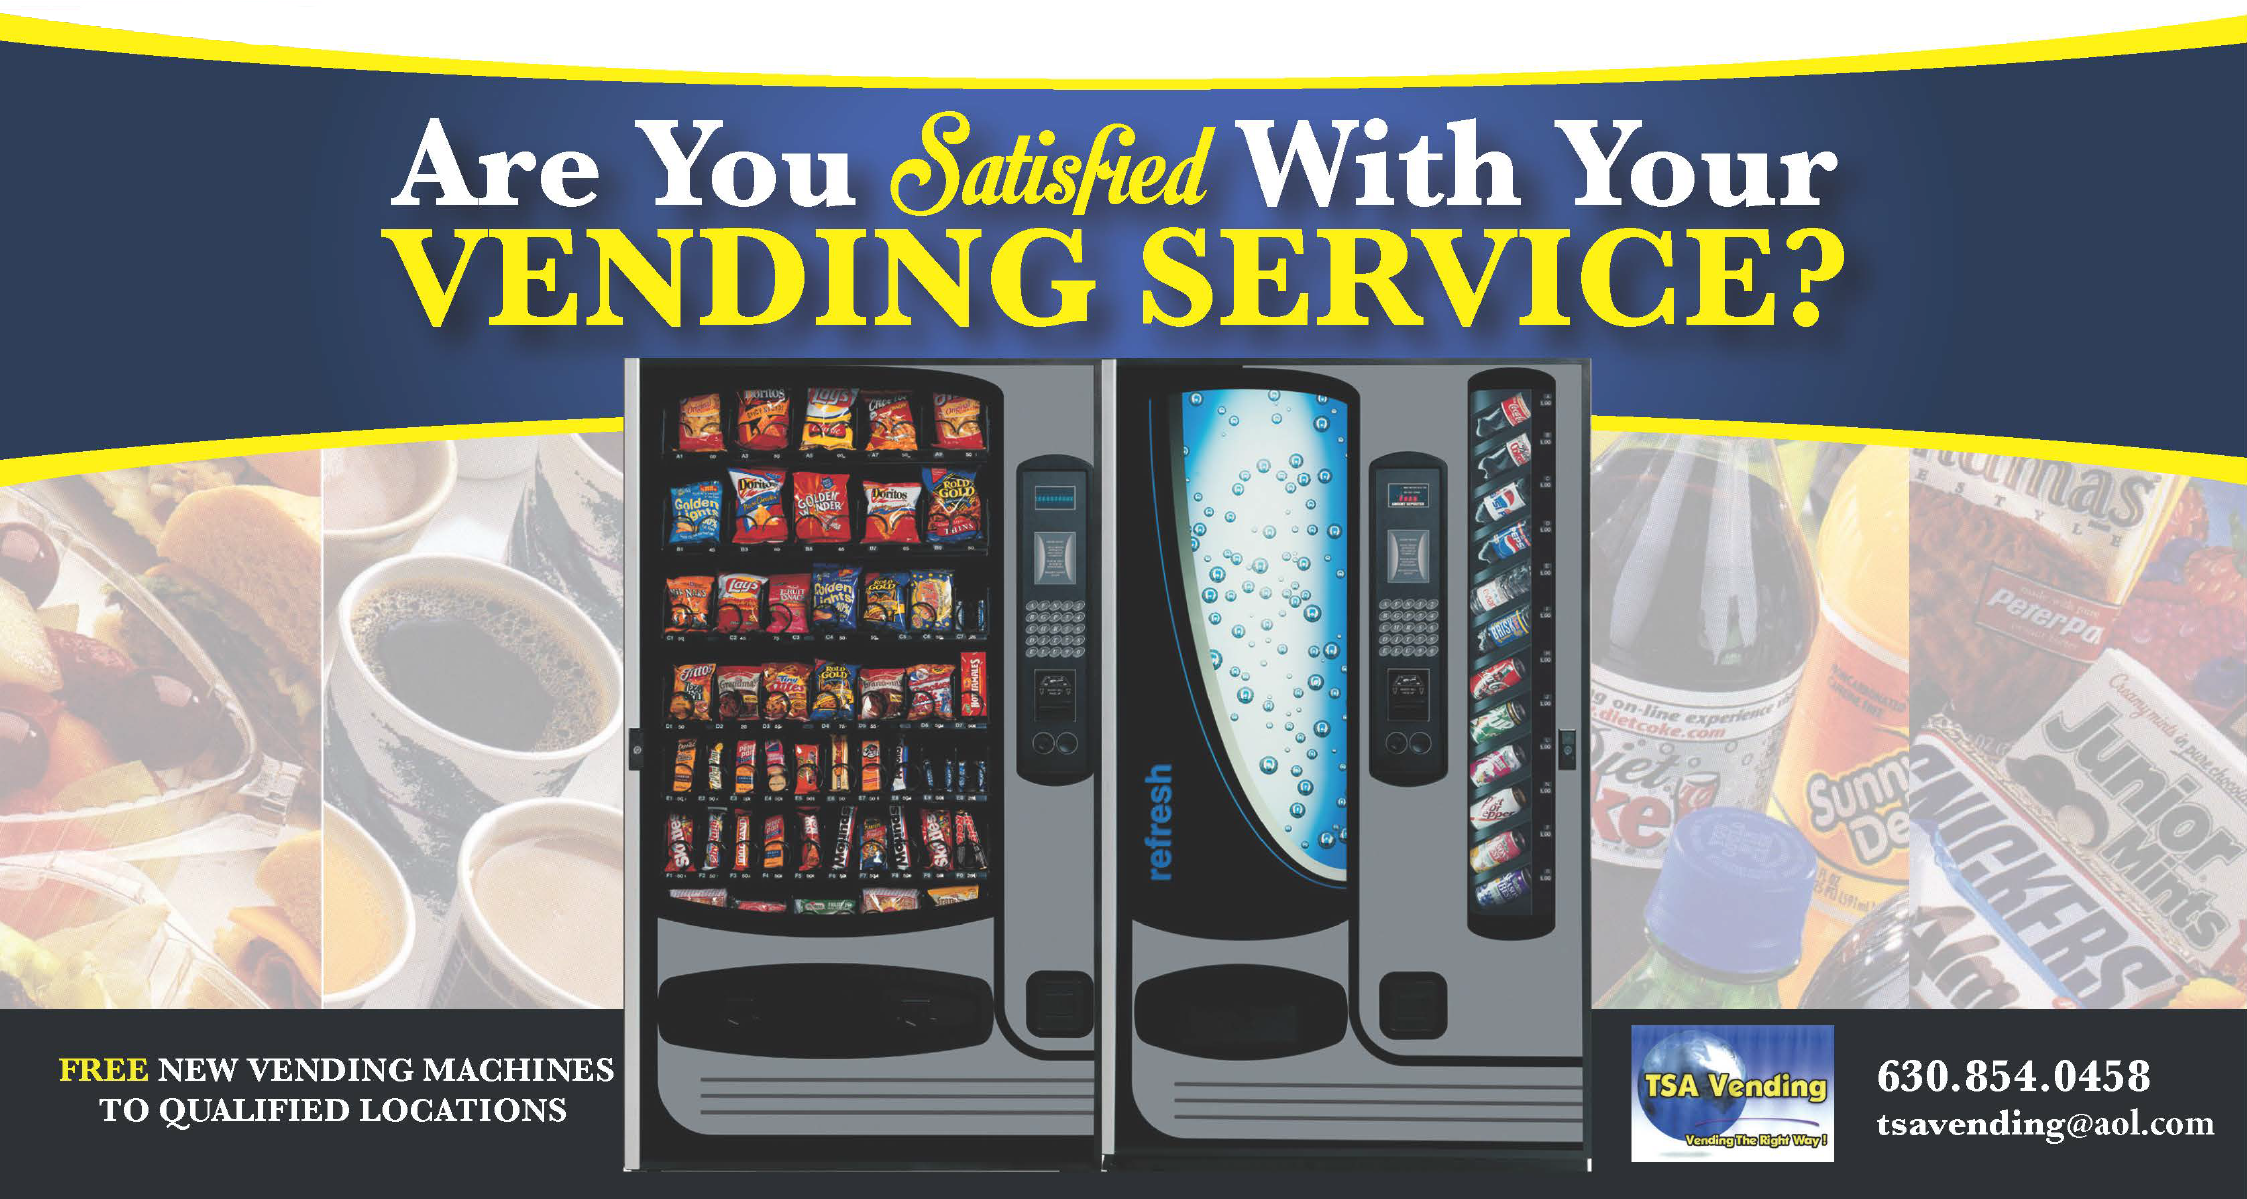 Are You Satisfied with Your Vending Service